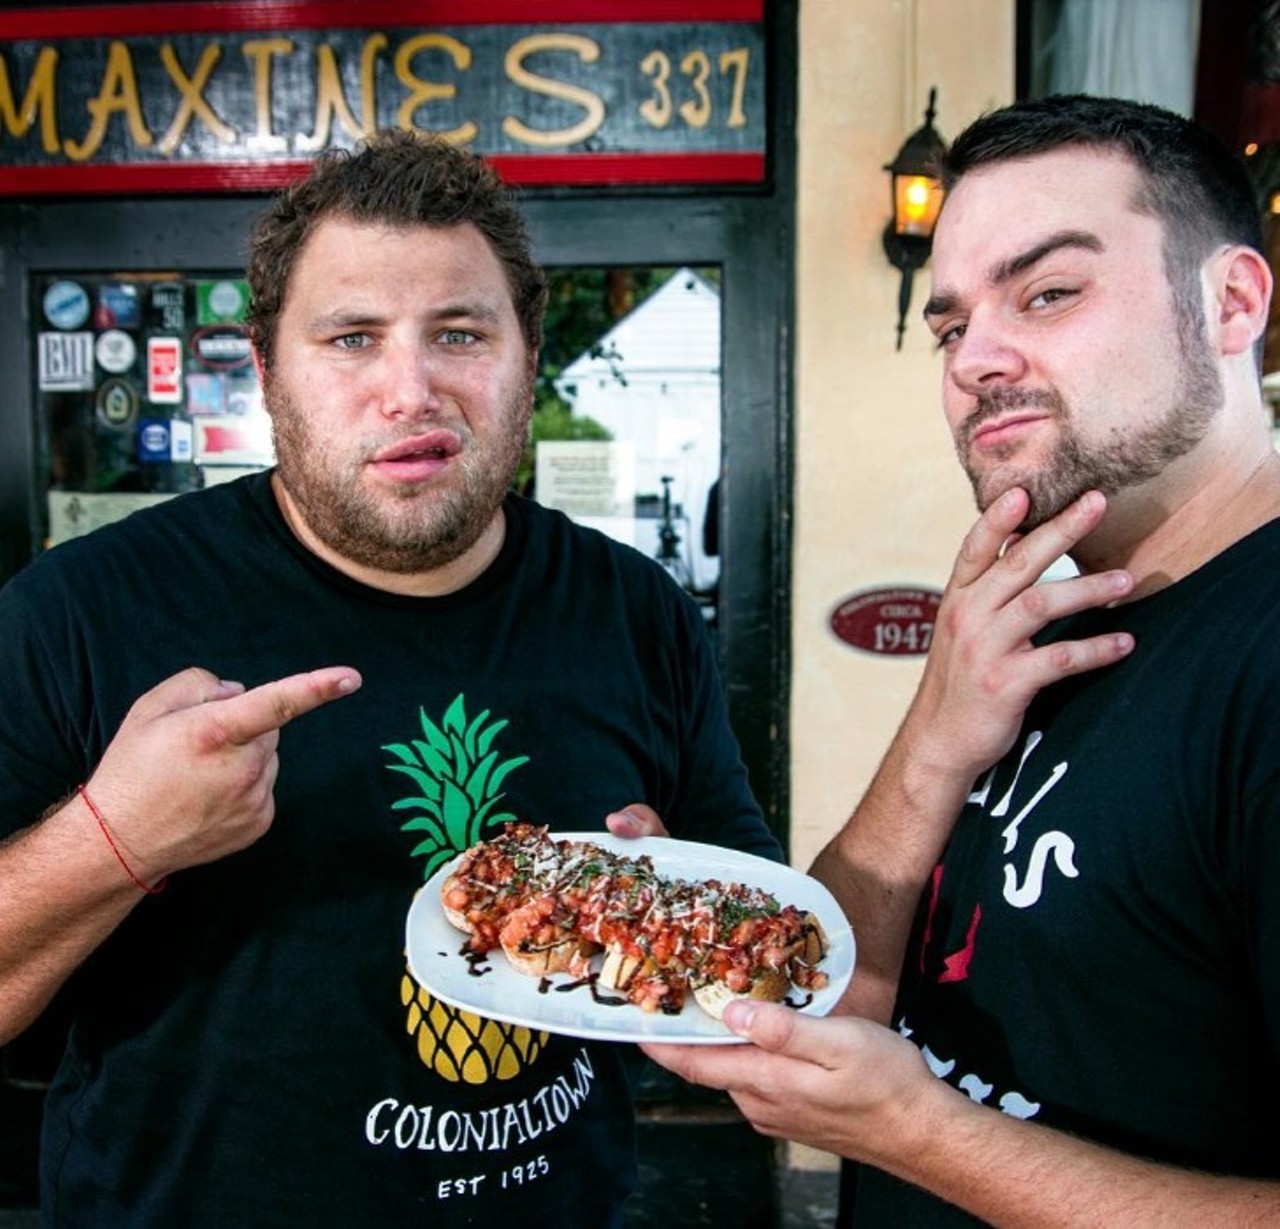 @brunchbrostv
Two local comrades have dedicated their lives to finding the perfect breakfast.